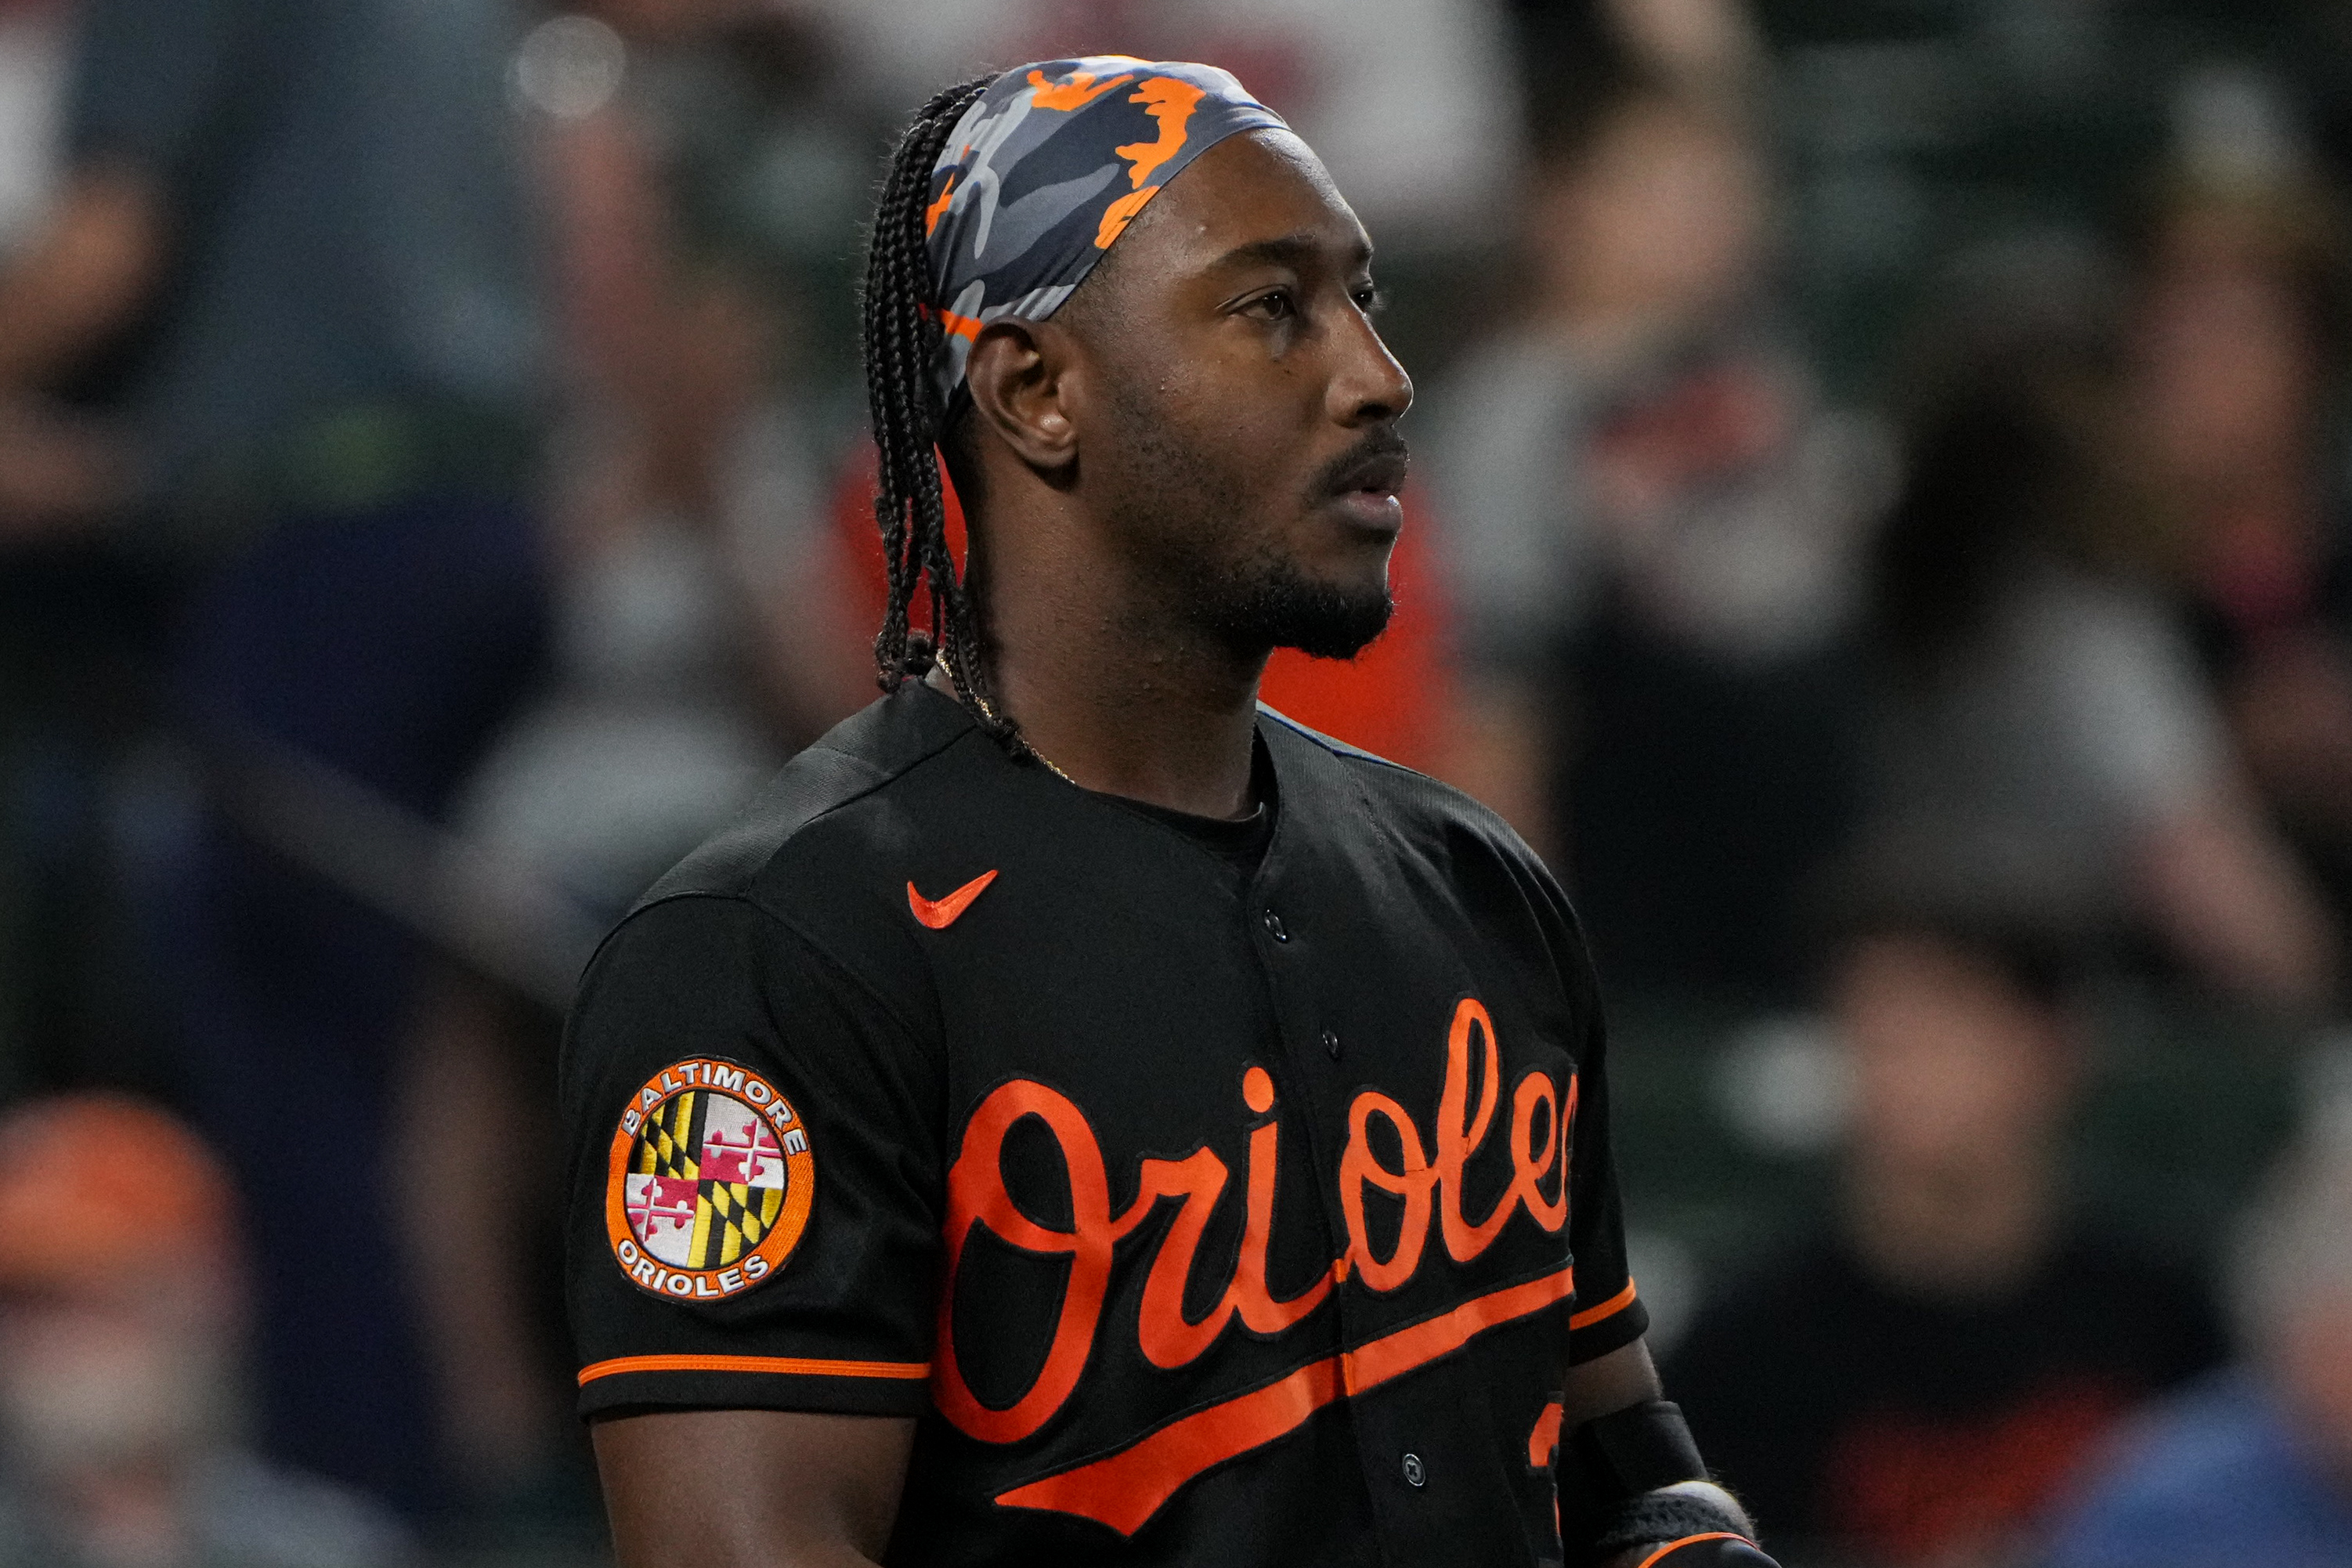 How does Jorge Mateo fit into the Orioles' long term plans